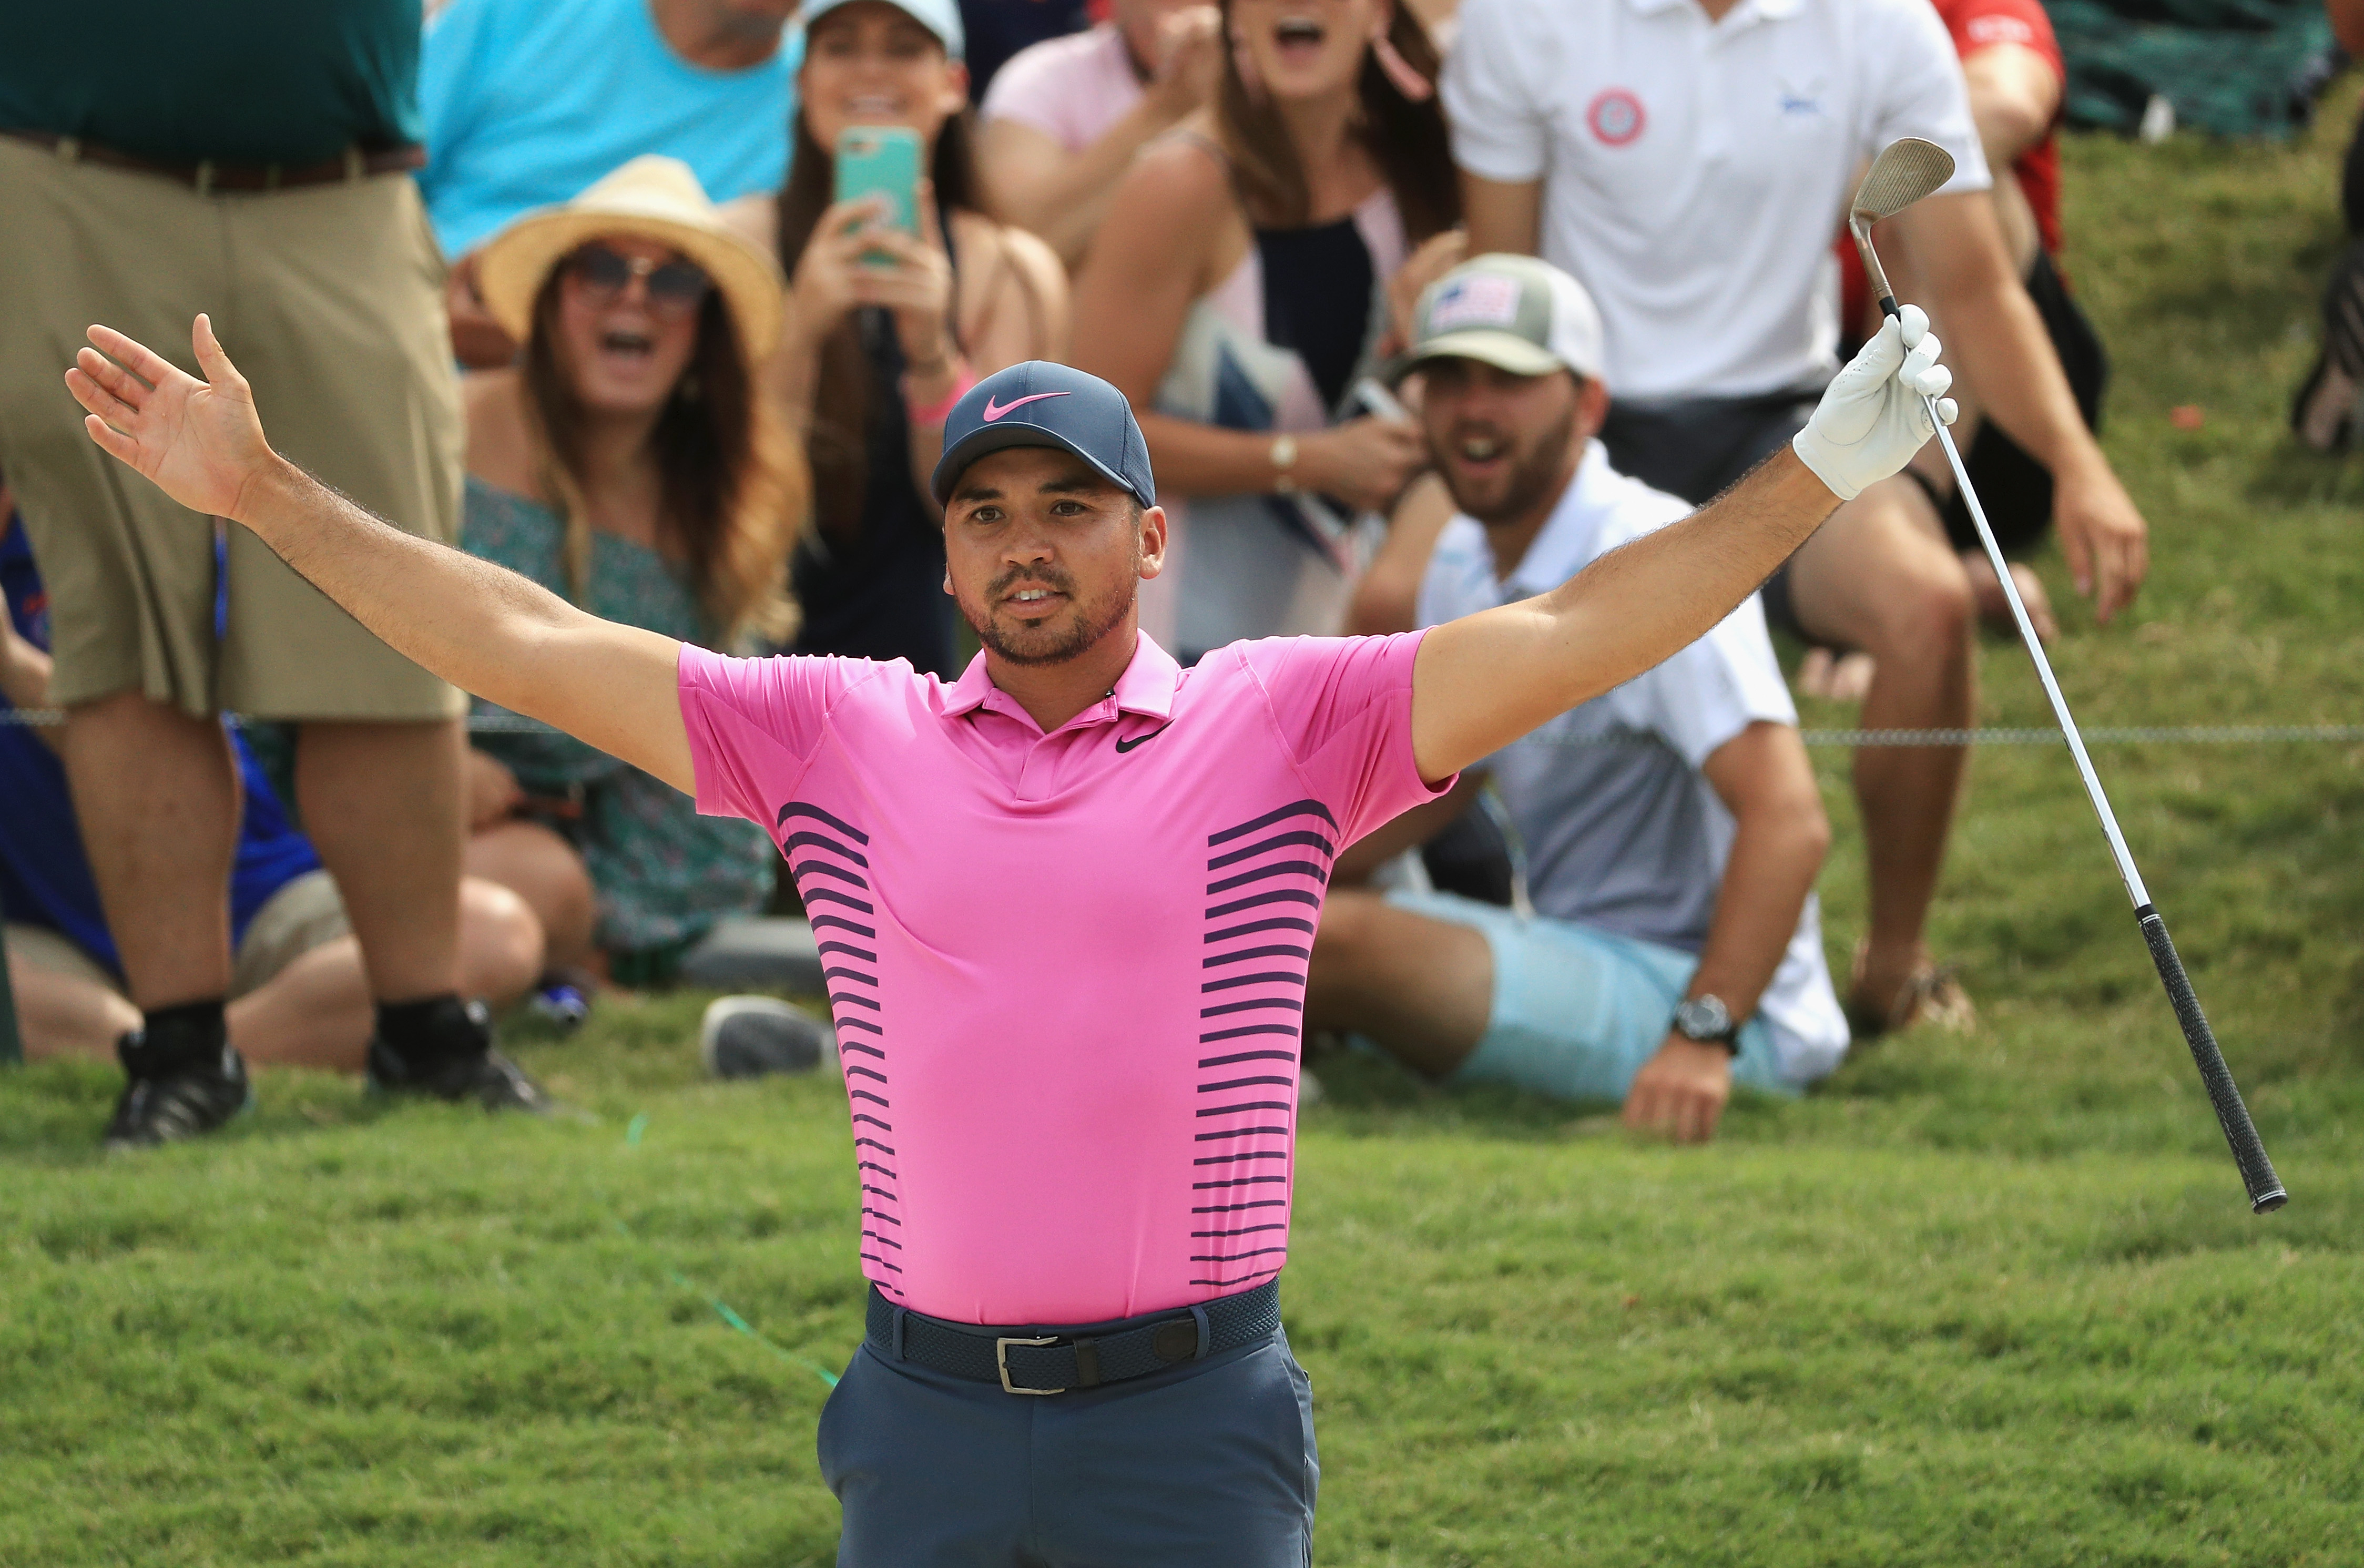 Fashion statements from The Players: How to wear pink on the golf course, Golf Equipment: Clubs, Balls, Bags